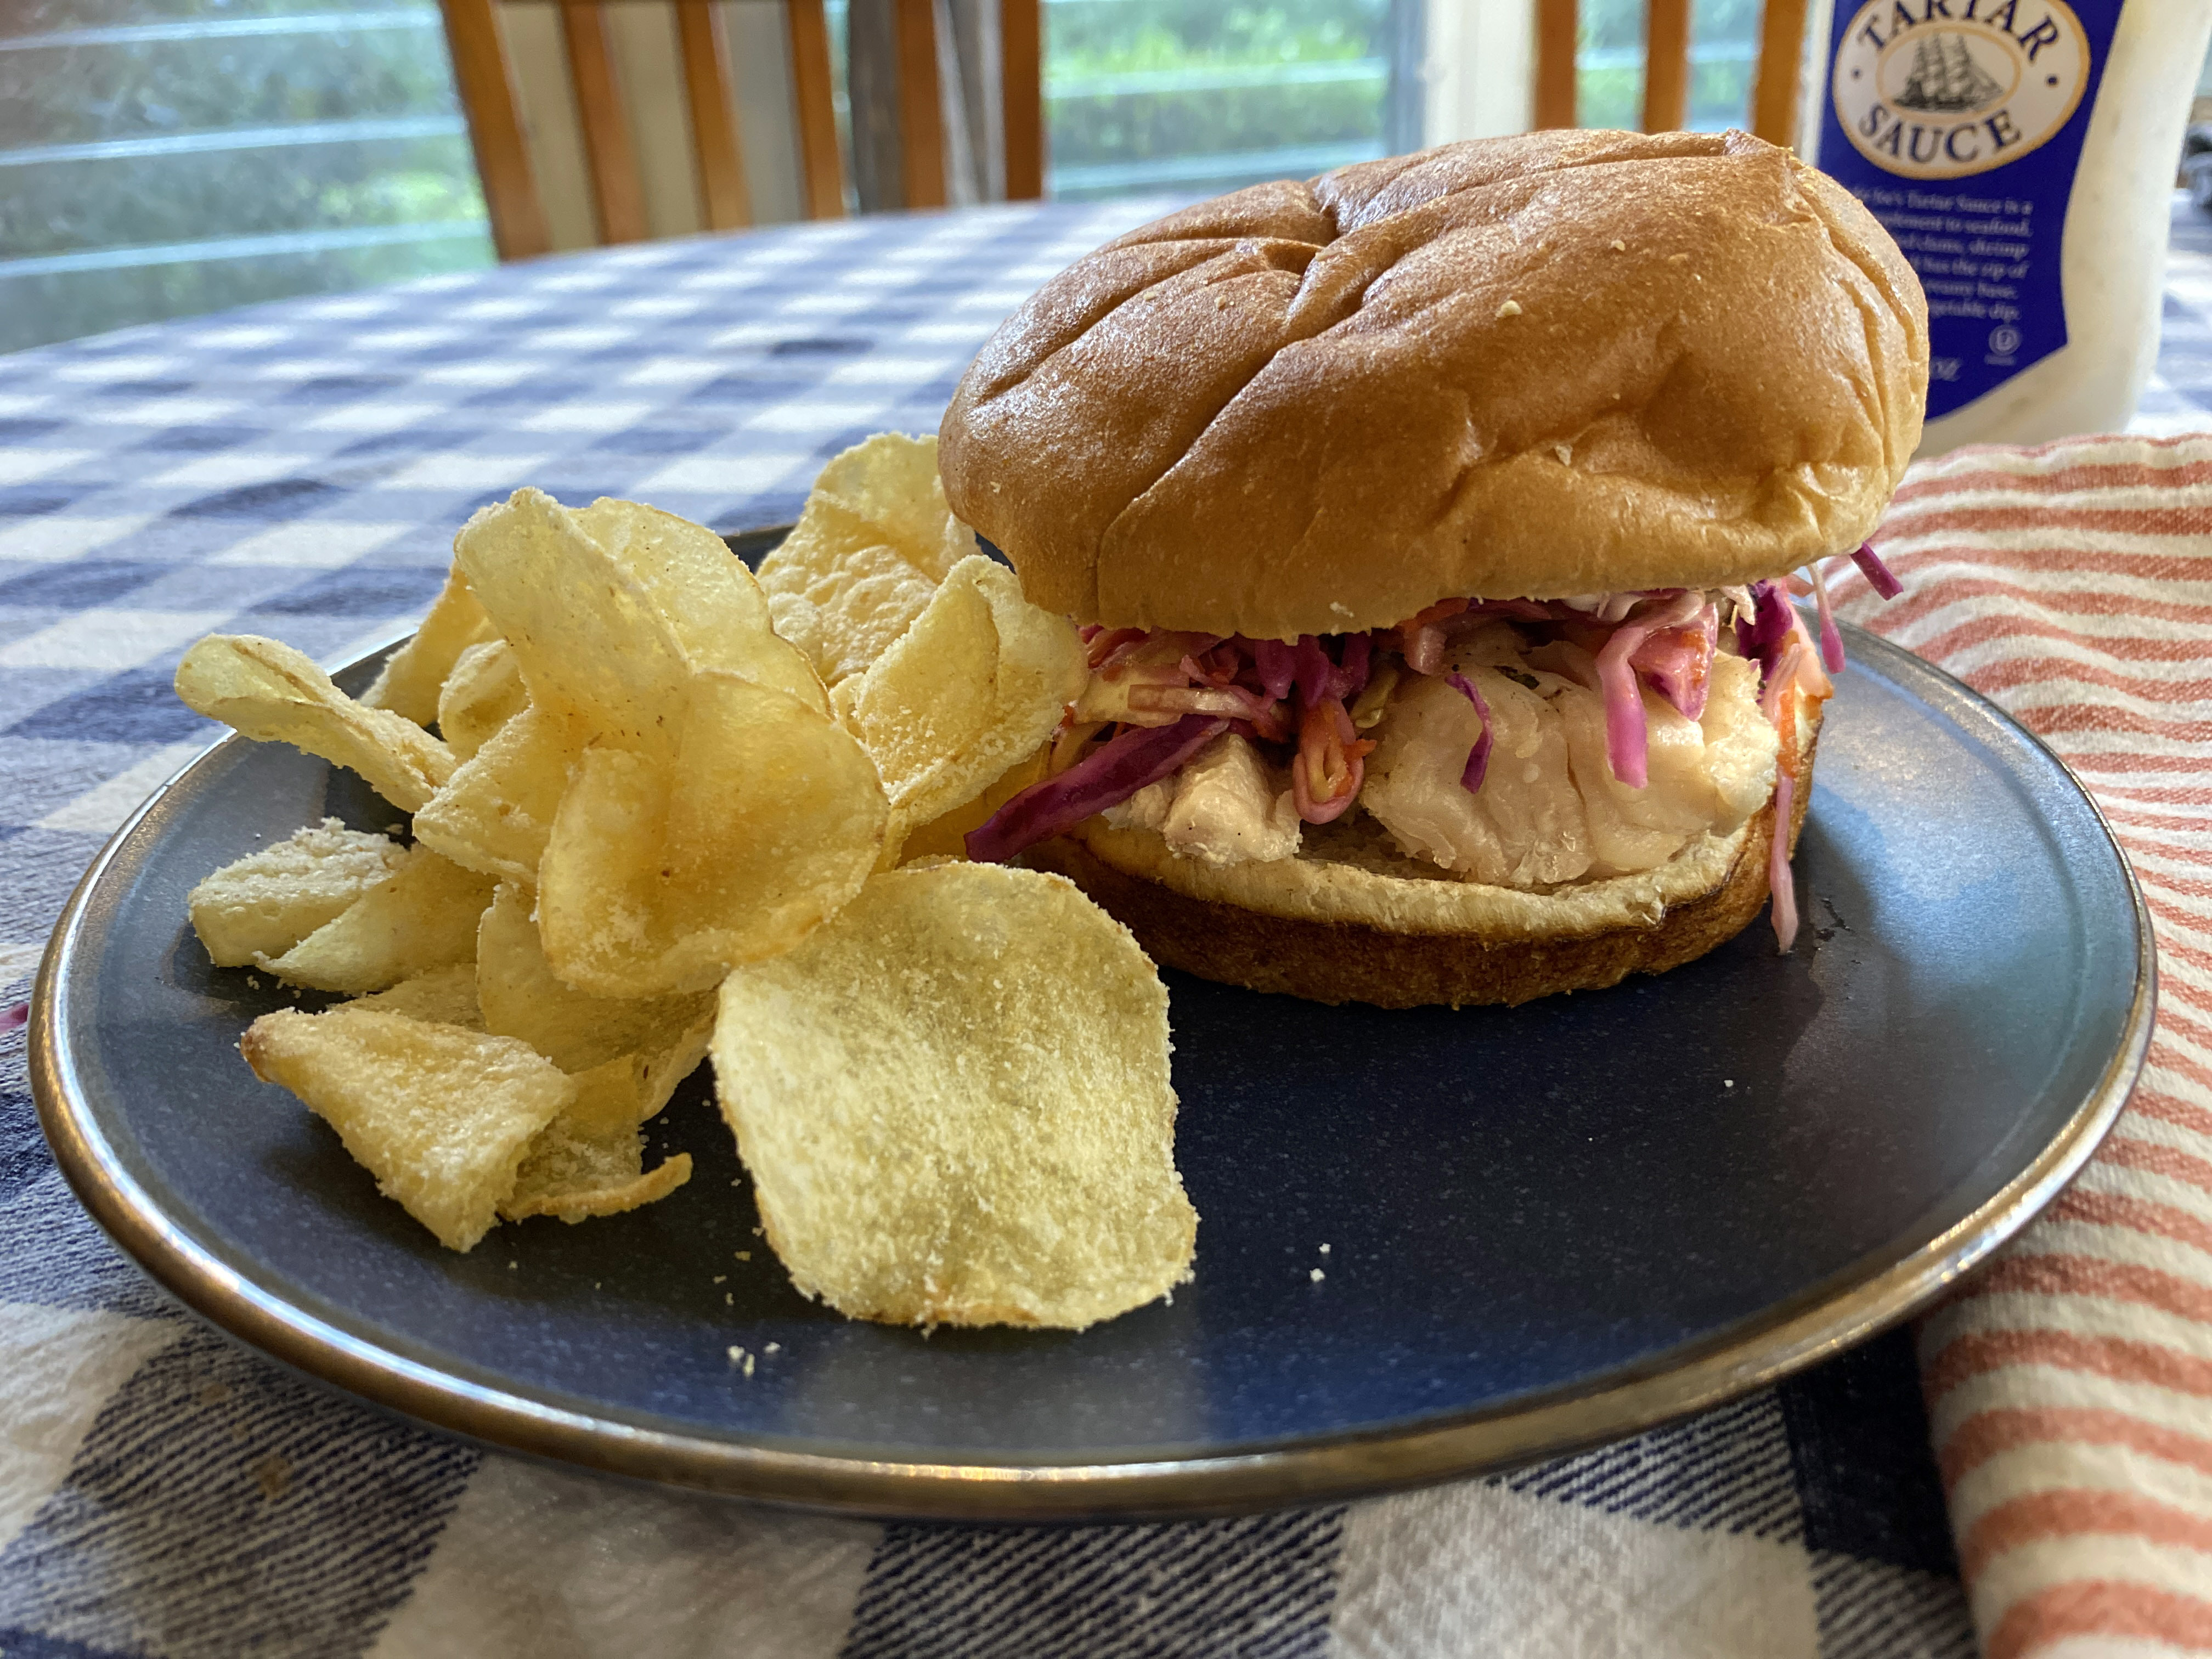 Sandwich sits on plate with chips